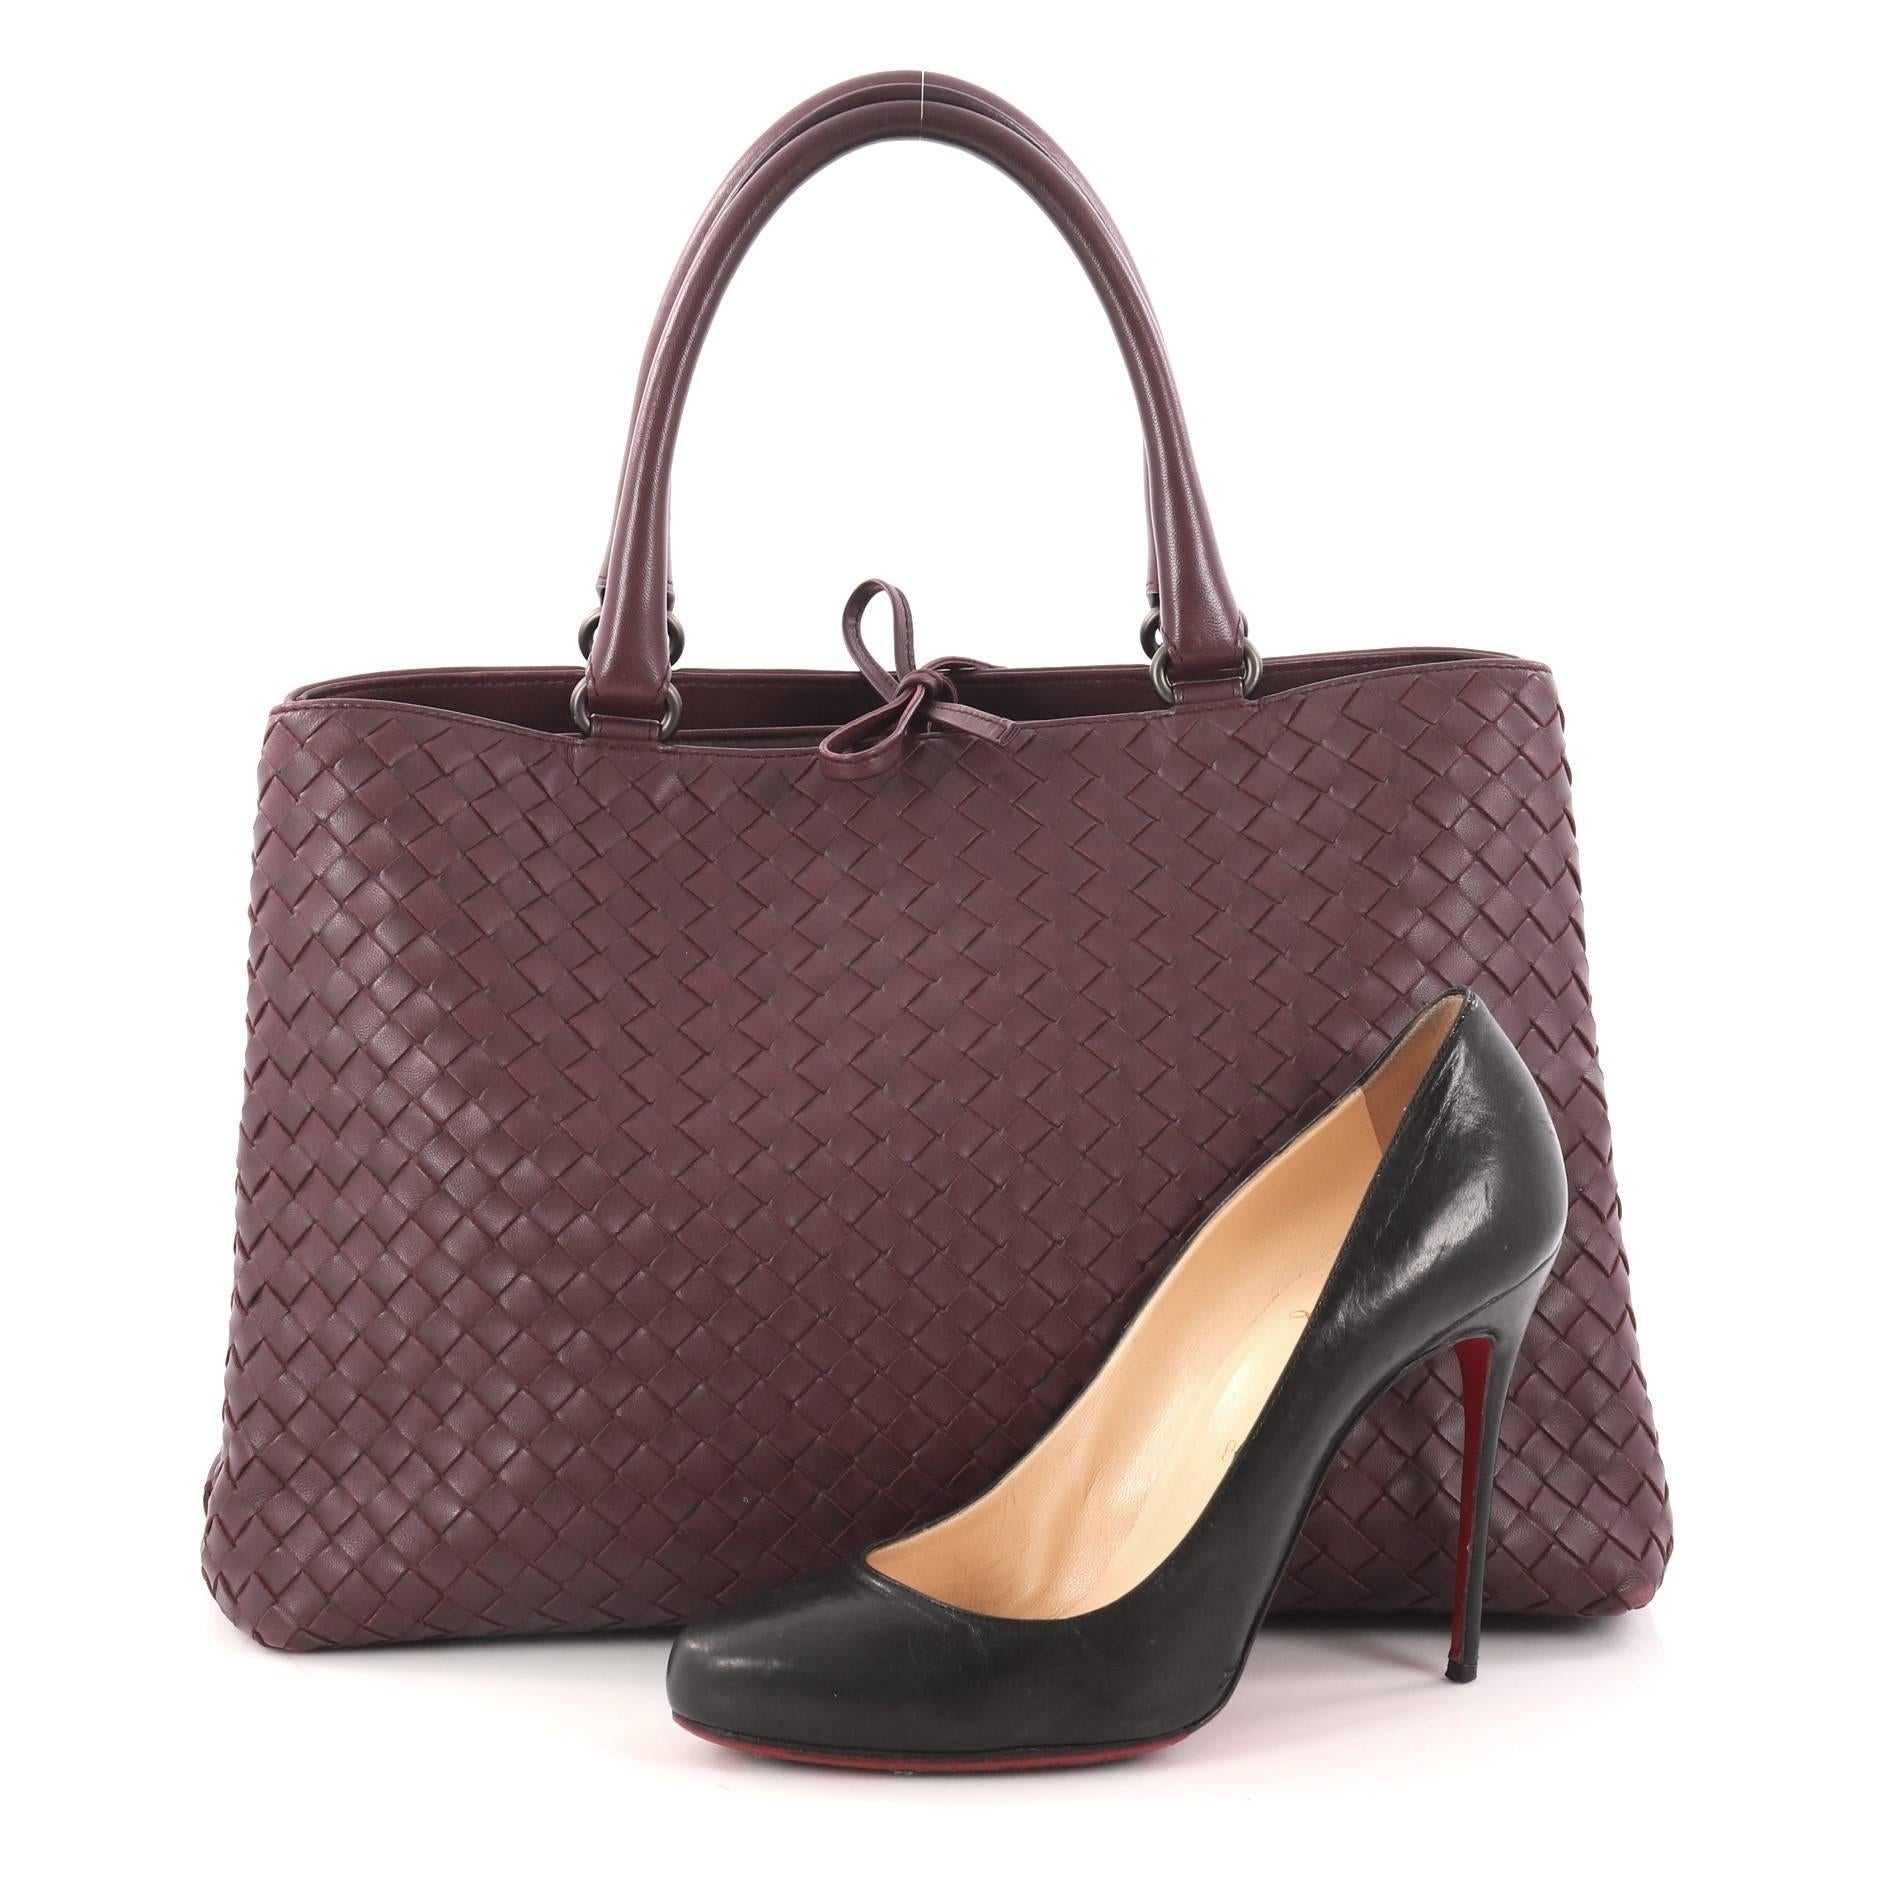 This authentic Bottega Veneta Milano Tote Intrecciato Nappa Large is a timeless, versatile piece you can surely take from day to night. Beautifully crafted in plum nappa leather in Bottega Veneta's signature intrecciato woven method, this stylish